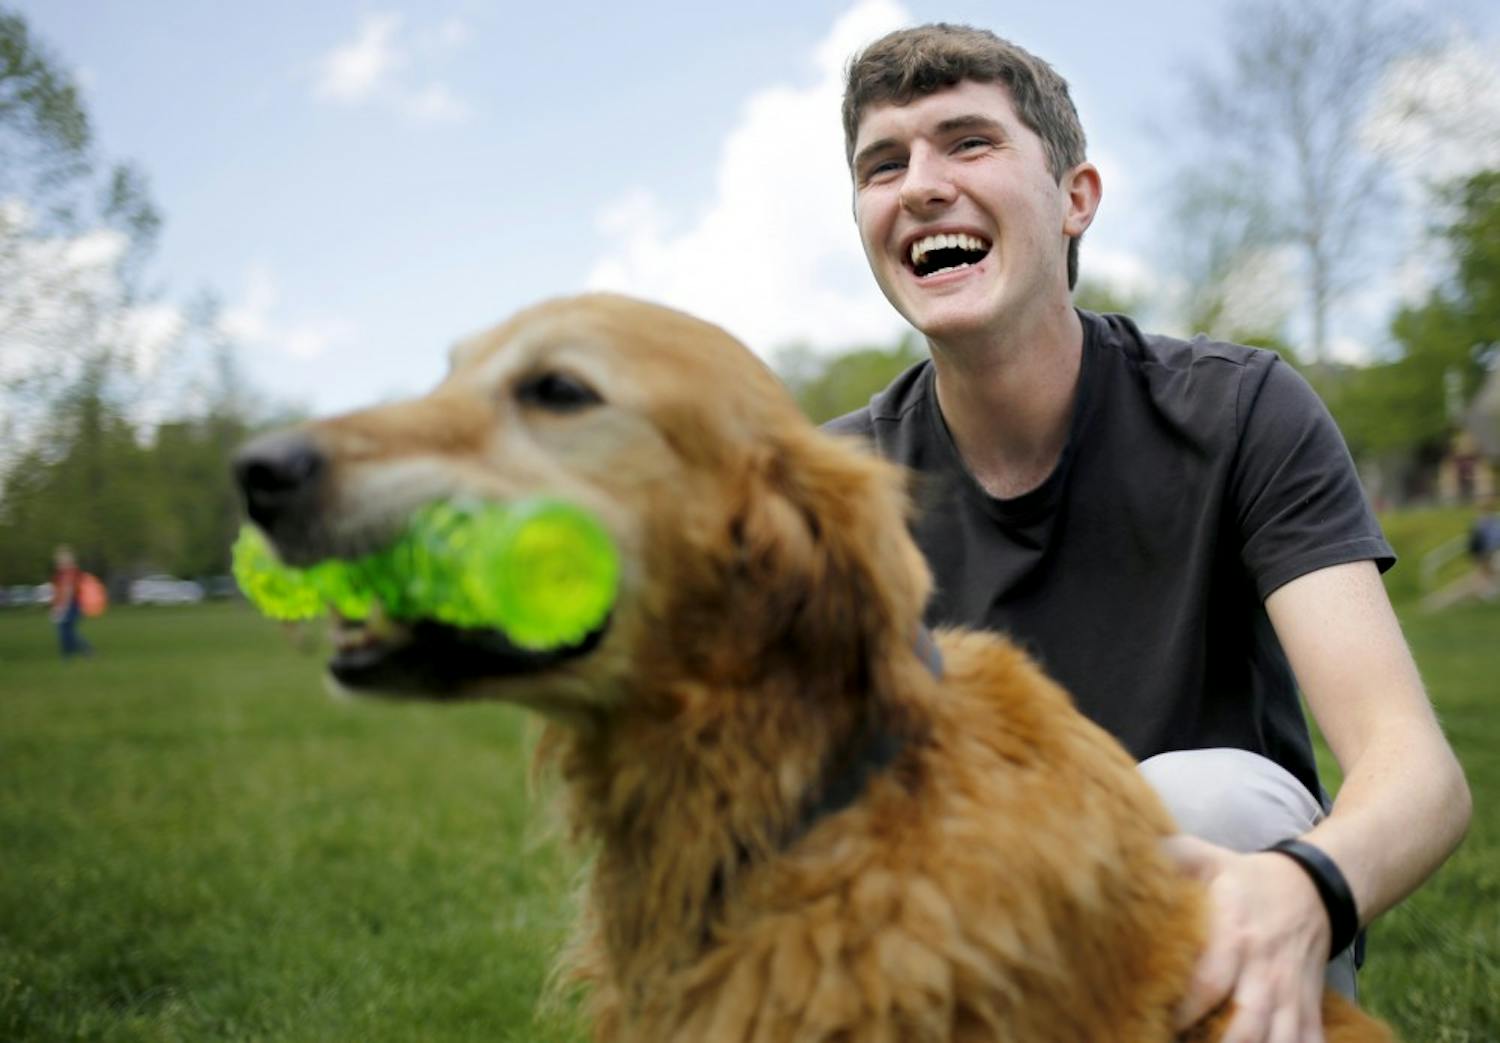 Junior Liam Foran plays with ten-year-old Golden Retriever Max during the Rent-A-Puppy event Thursday at Dunn Meadow. "I've been away from my dogs for too long, and I just needed some puppy love," Foran said. 